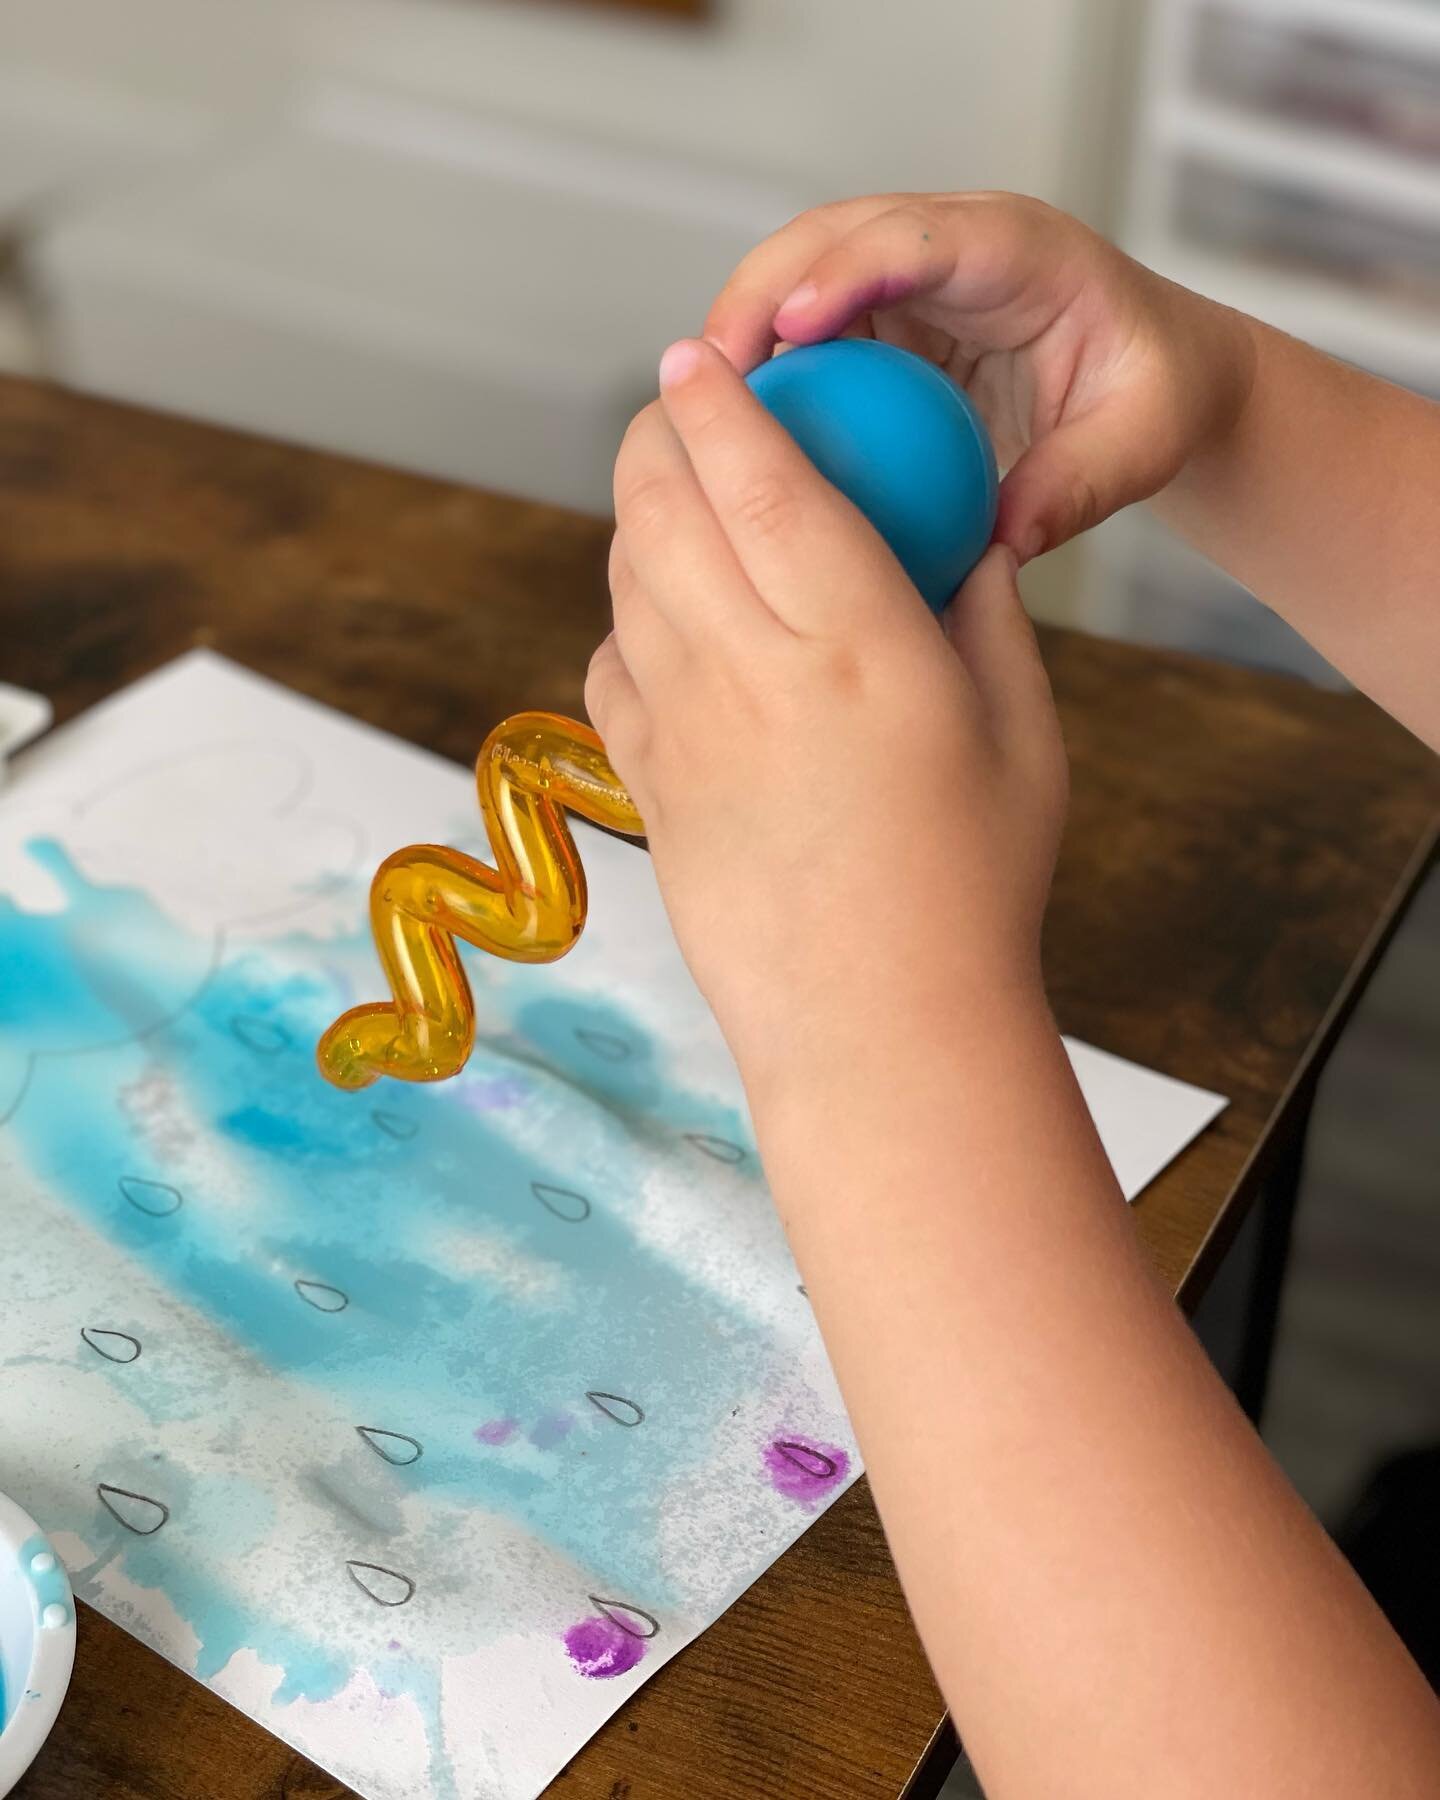 Happy #finemotorfriday 🎨

April showers rain dropper activity to target: 
-fine motor strengthening 
-bilateral hand skills
-crossing midline
-visual motor skills 
-sensory play 

#finemotorfriday #asd #earlyintervention #occupationaltherapy #OT #pe